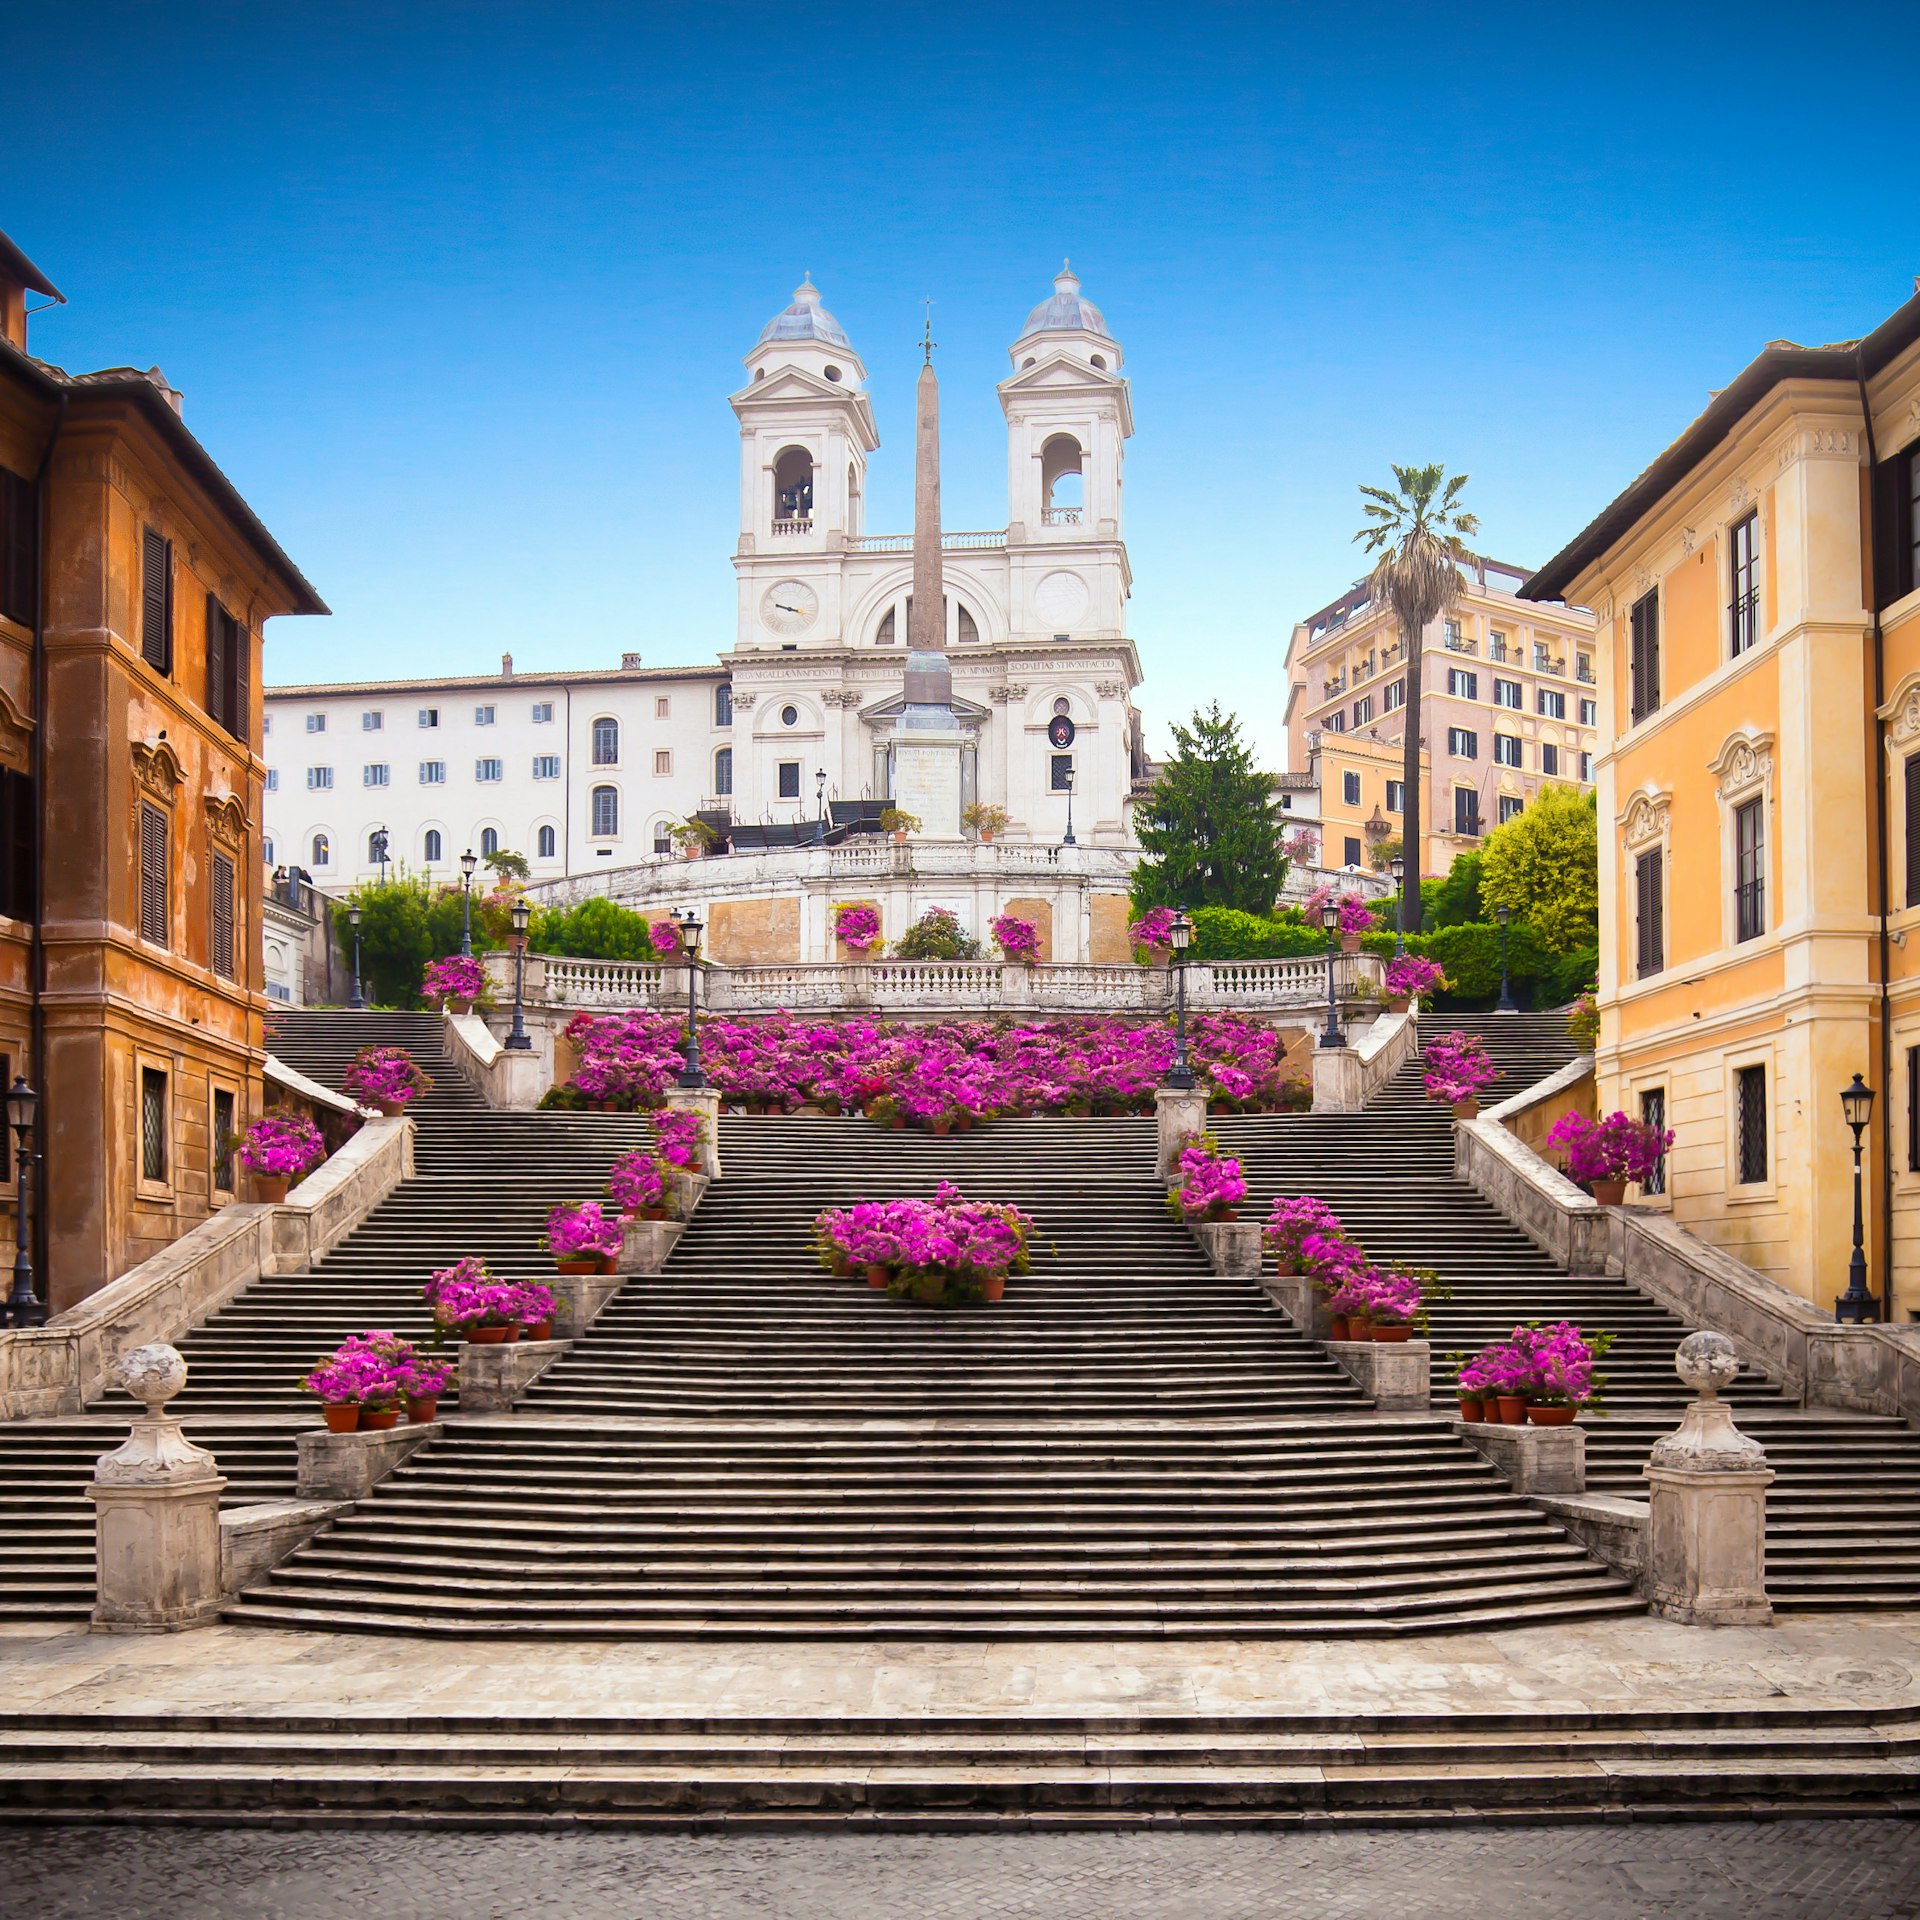 The Spanish Steps are covered with azaleas.